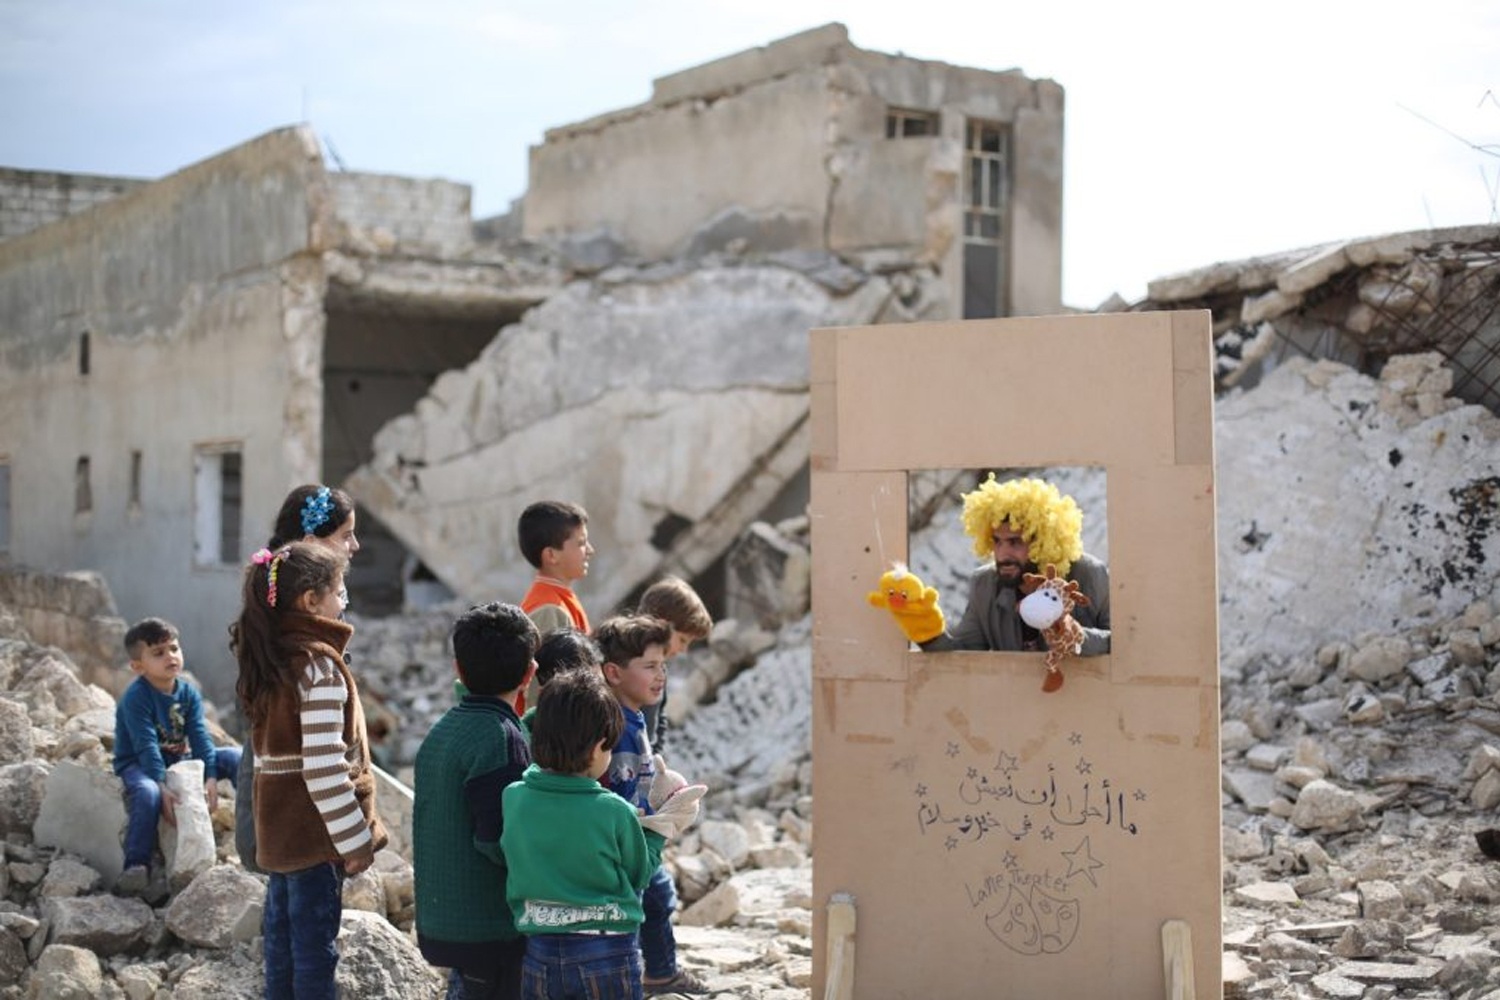 Children watch a puppet show in Syria. Photo: Walid Abo Rashed. Centre for Arts and Social Transformation, University of Auckland.